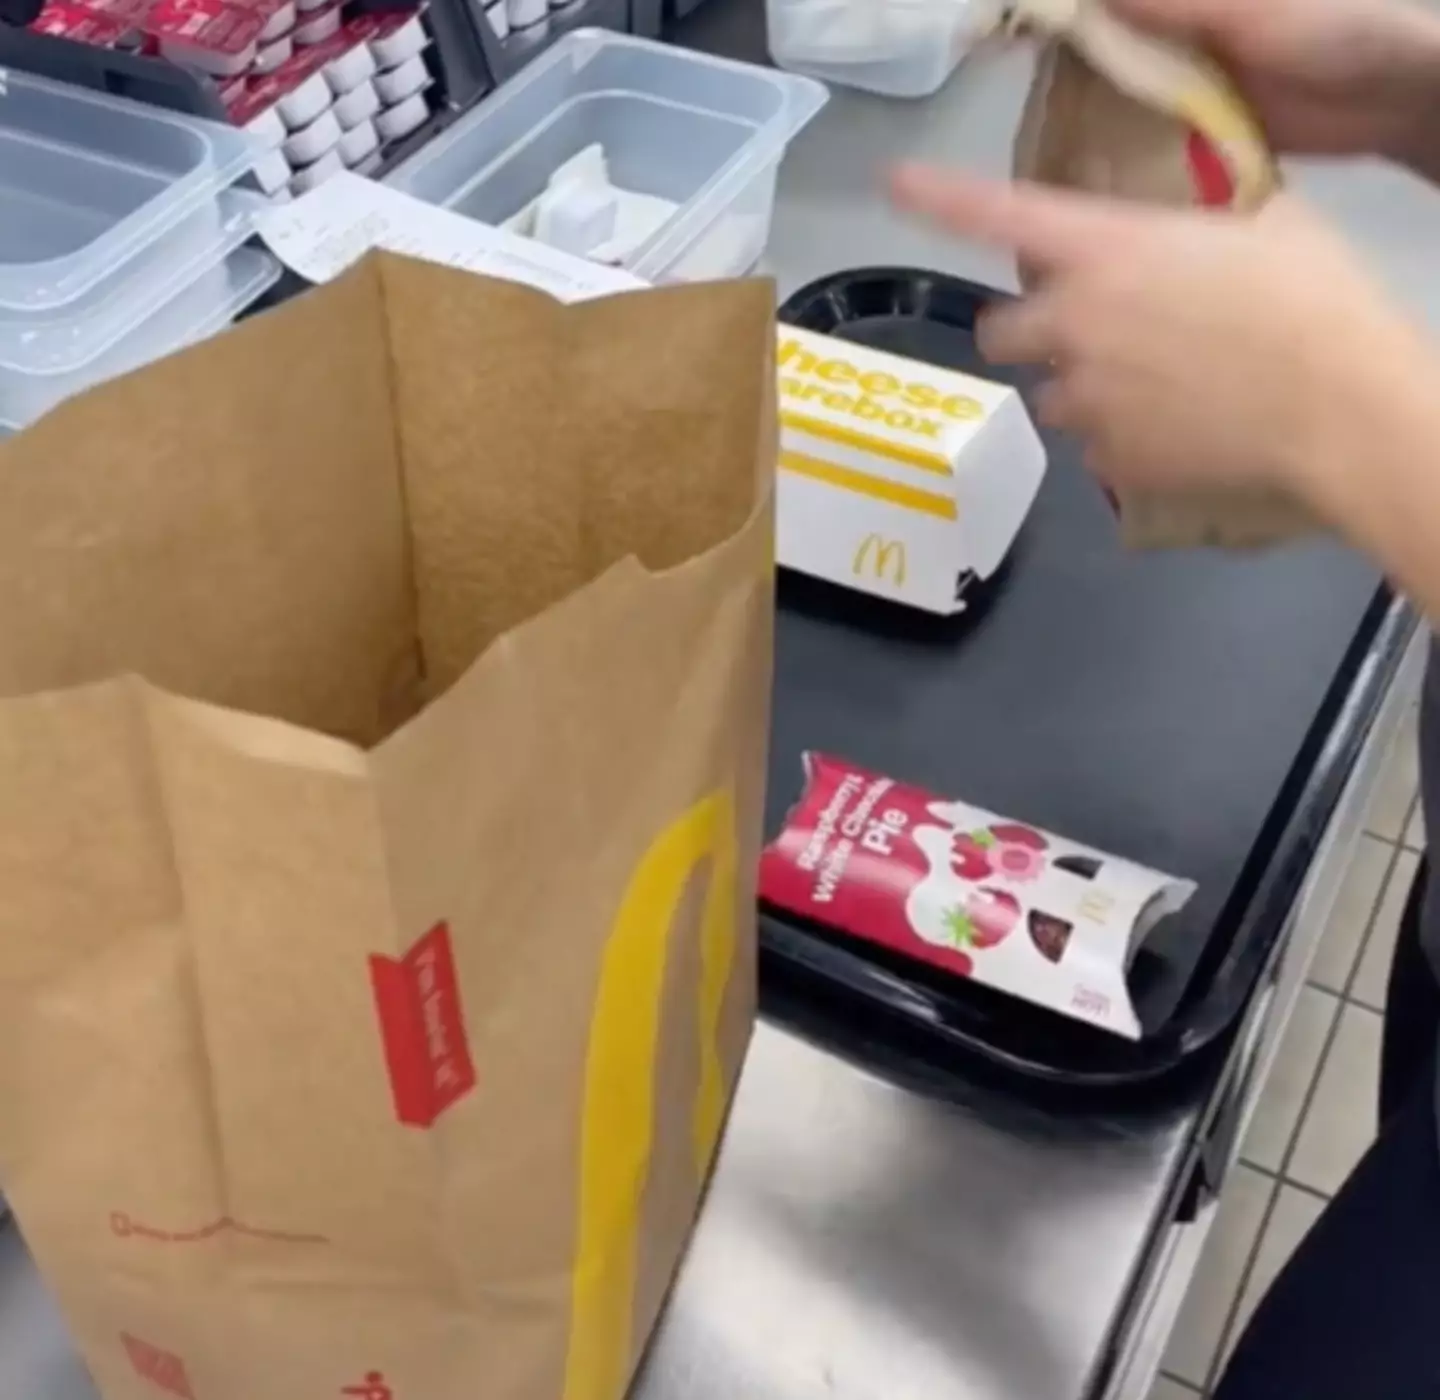 McDonald's have introduced a new process to ensure their deliveries aren't missing items.